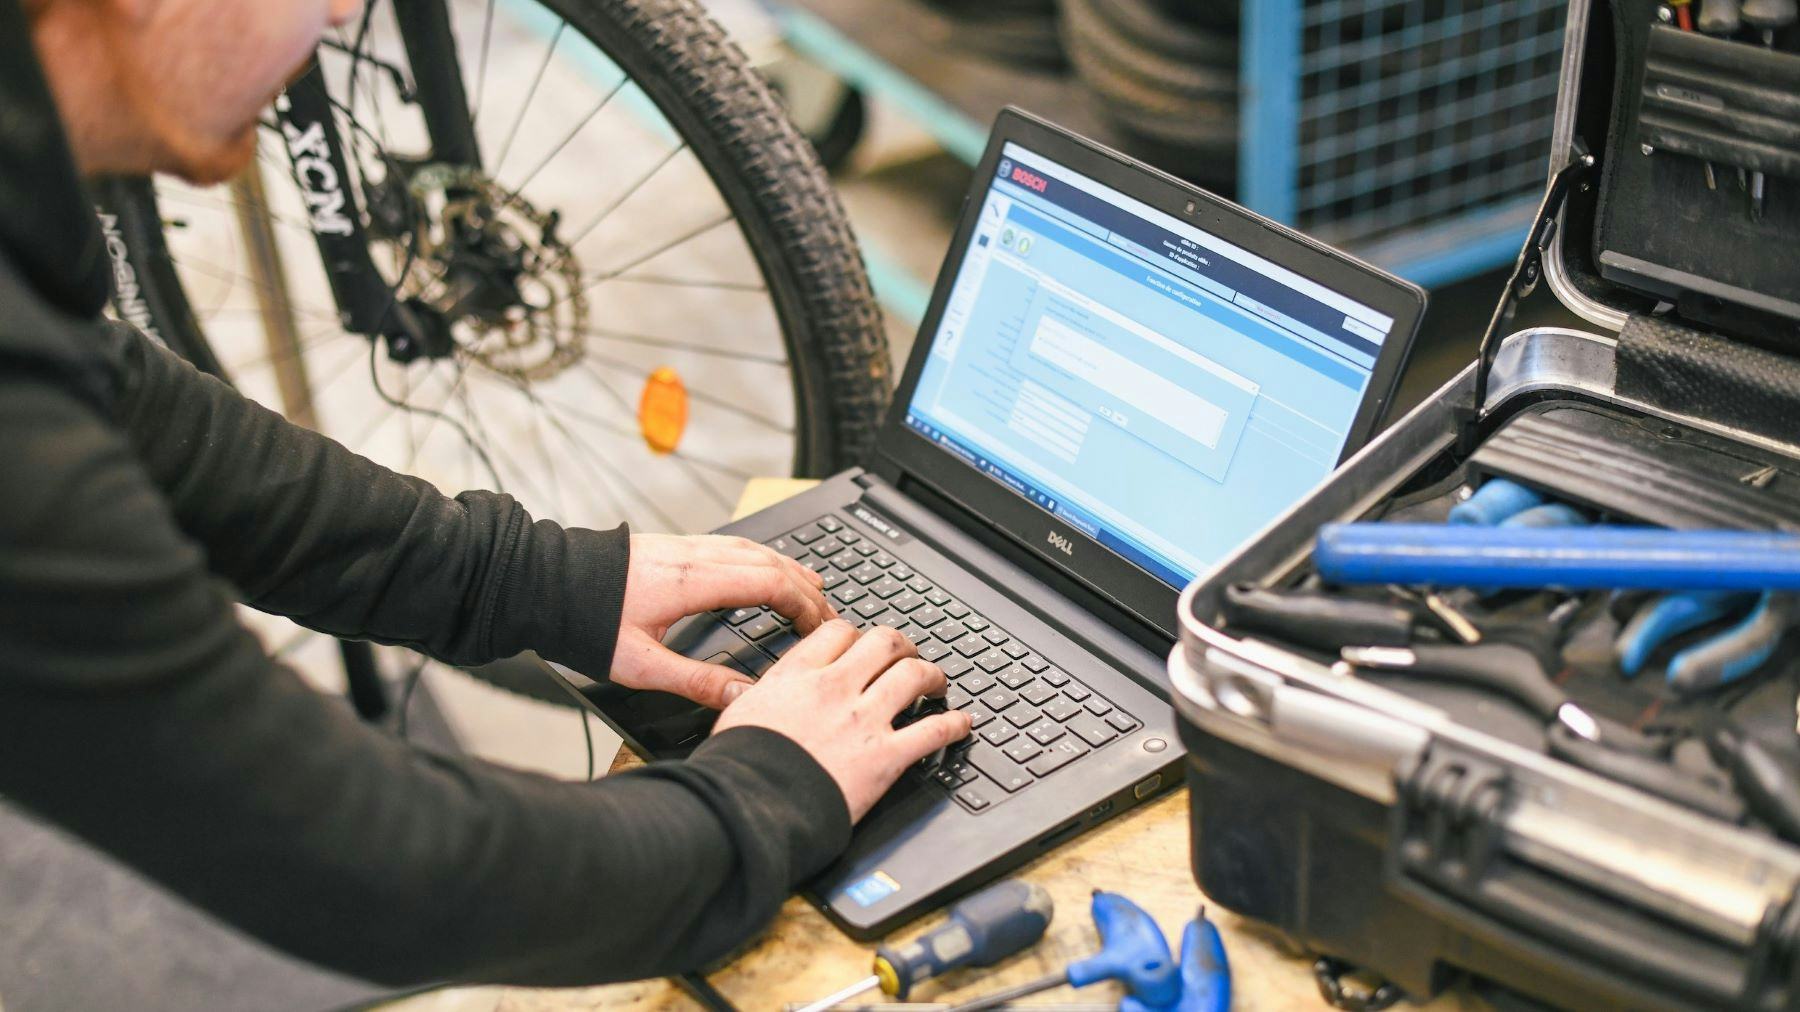 Originally dealing with the maintenance of e-bikes fleets, Vélogik now has a catalogue of software solutions for fleets operators and, soon, for independent retailers. - Photo Vélogik